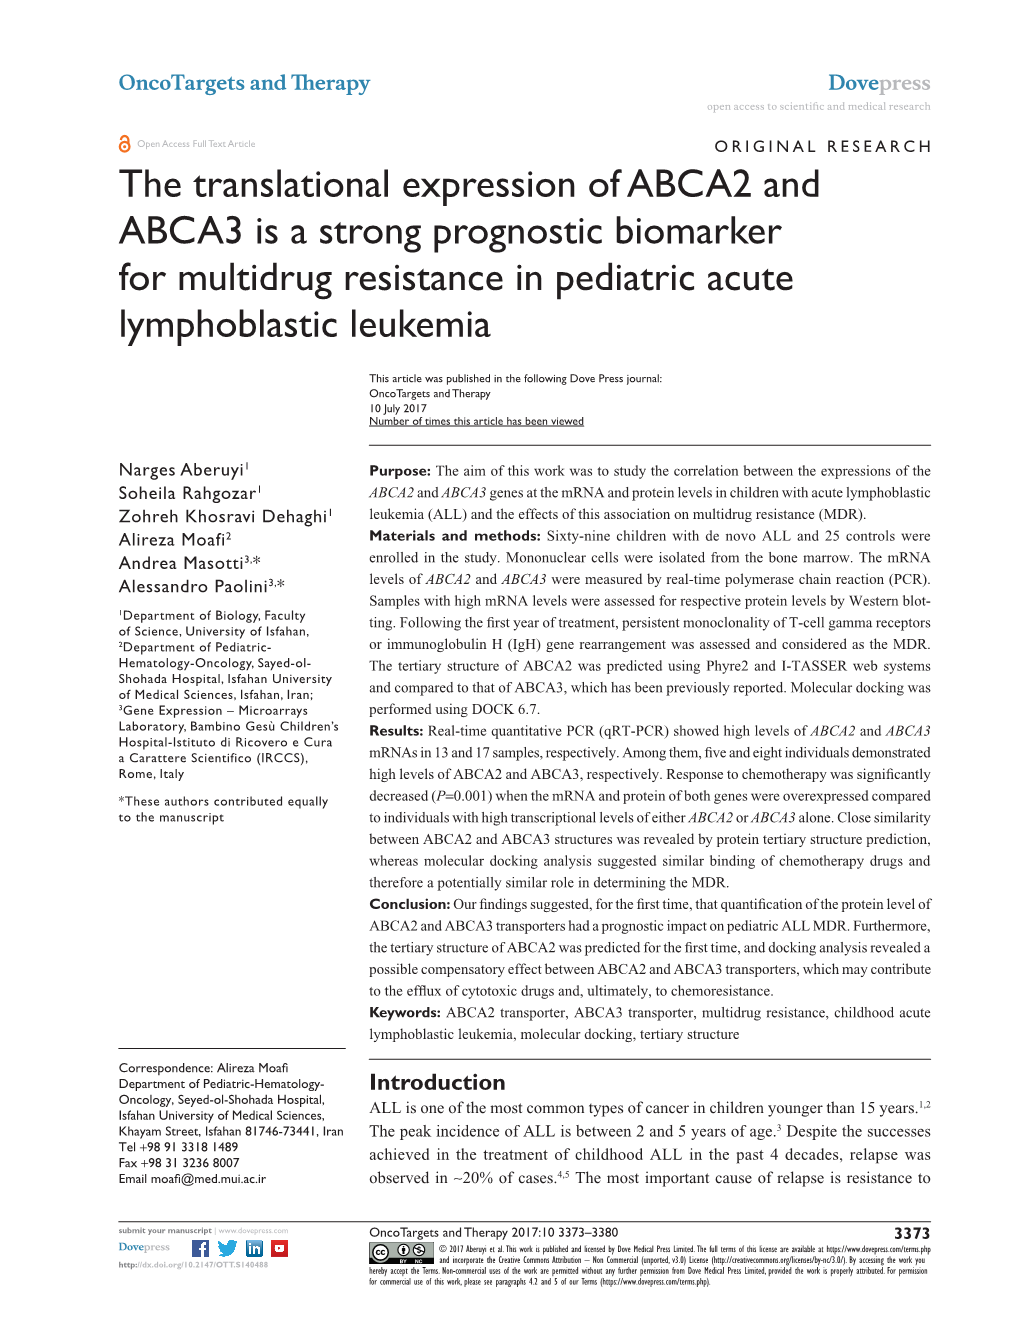 The Translational Expression of ABCA2 and ABCA3 Is a Strong Prognostic Biomarker for Multidrug Resistance in Pediatric Acute Lymphoblastic Leukemia